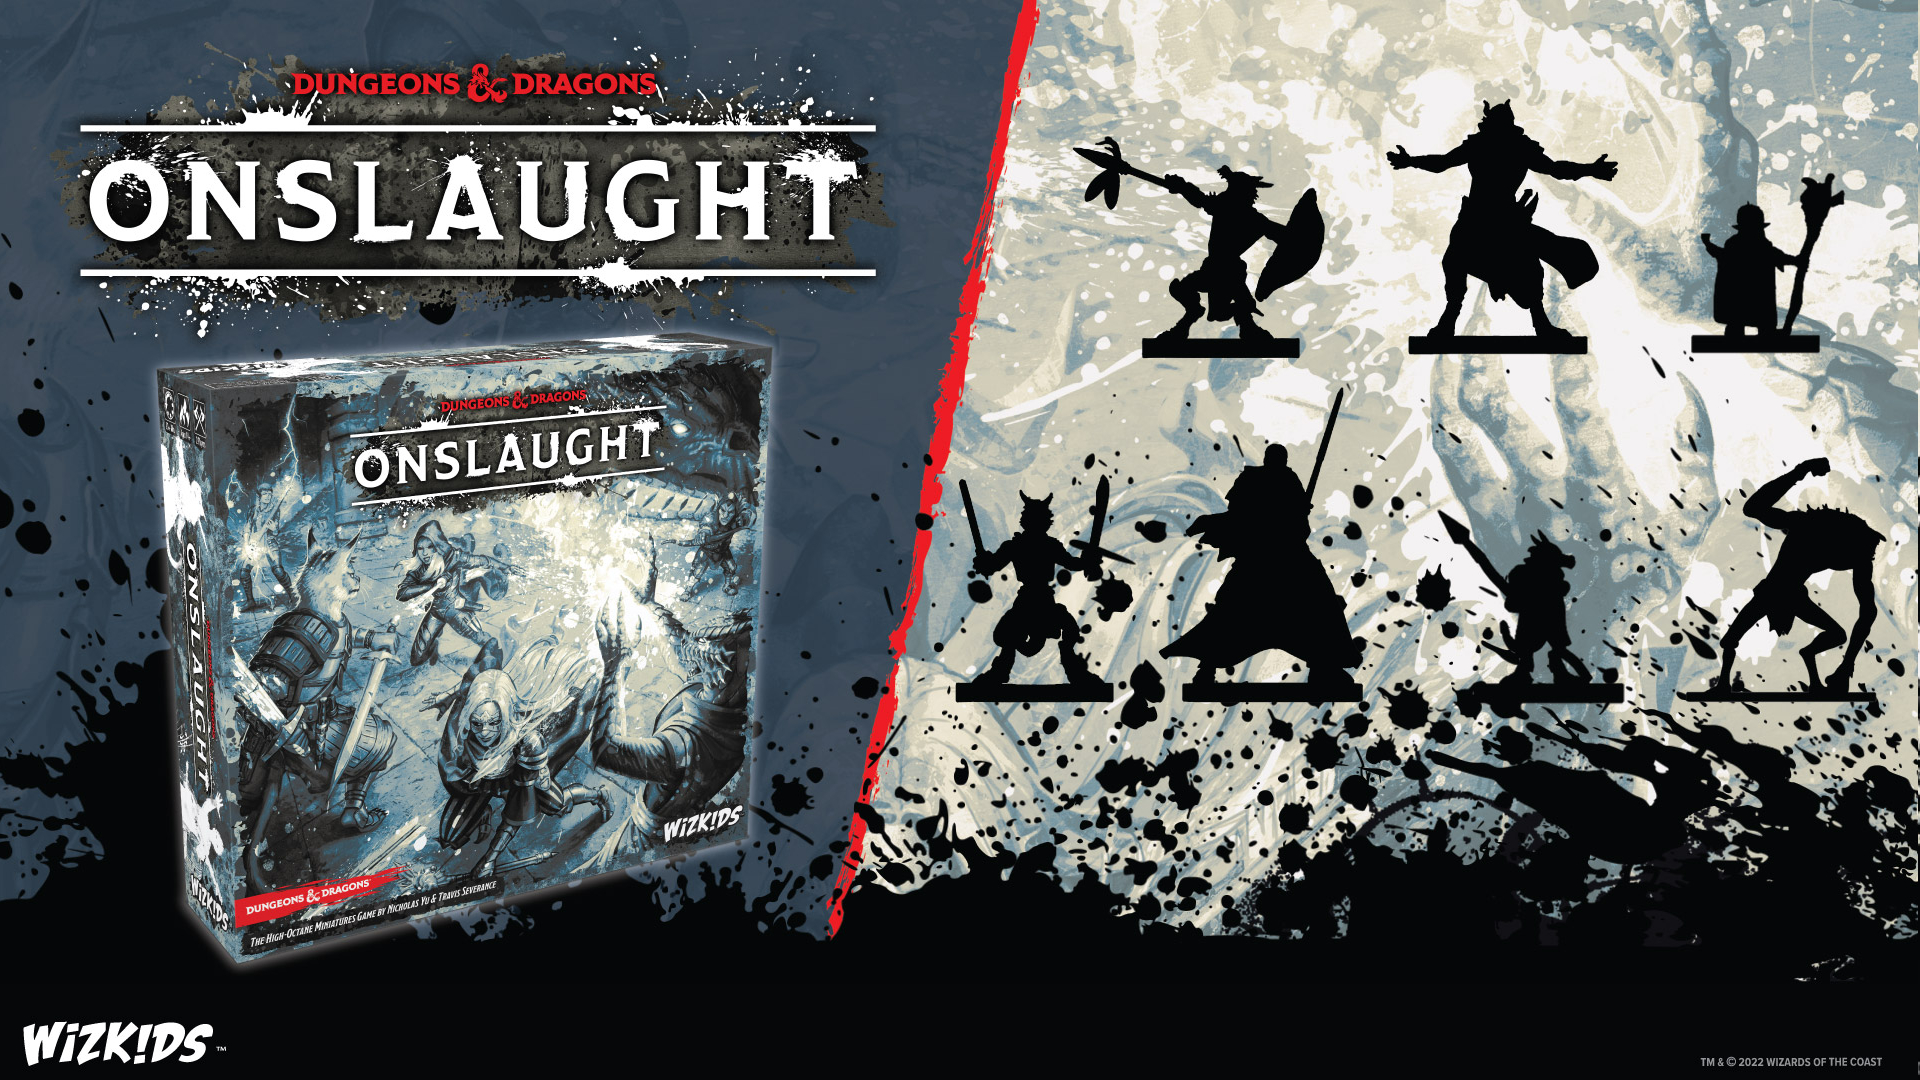 Dungeons & Dragons Onslaught révèle une image